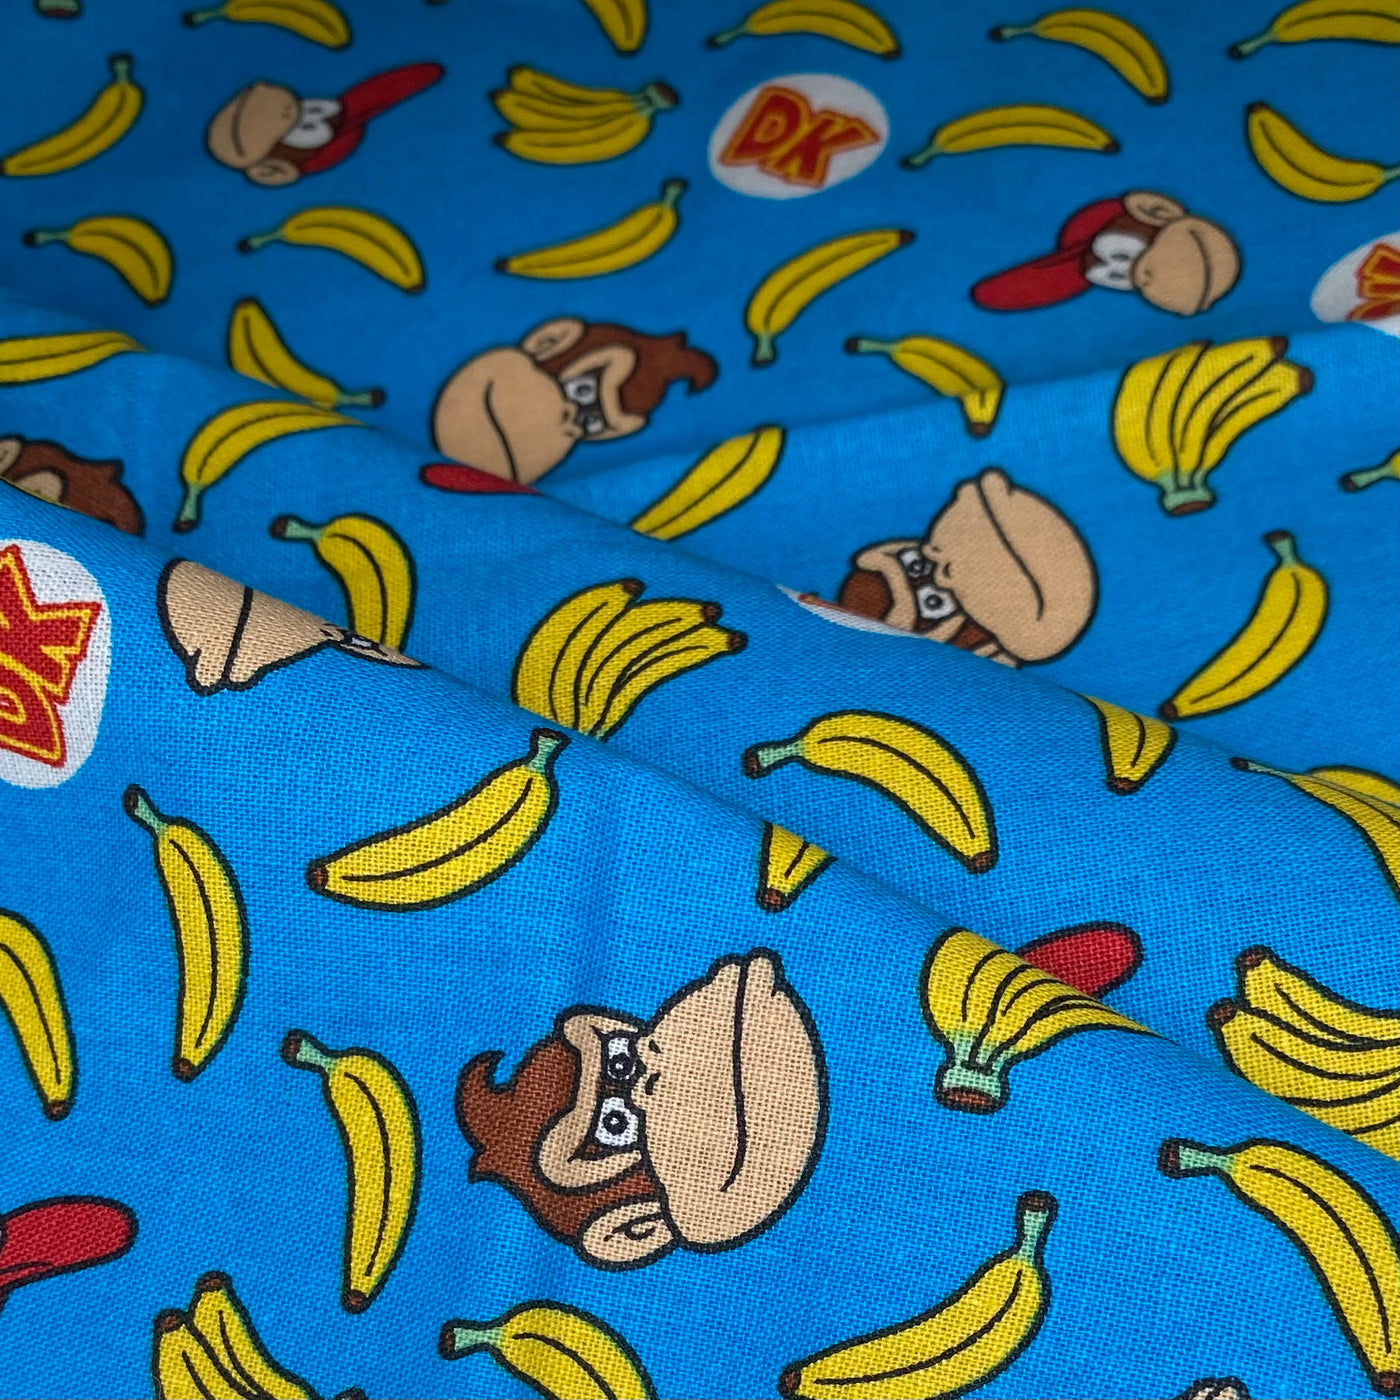 Quilting Cotton - Donkey Kong - Remnant